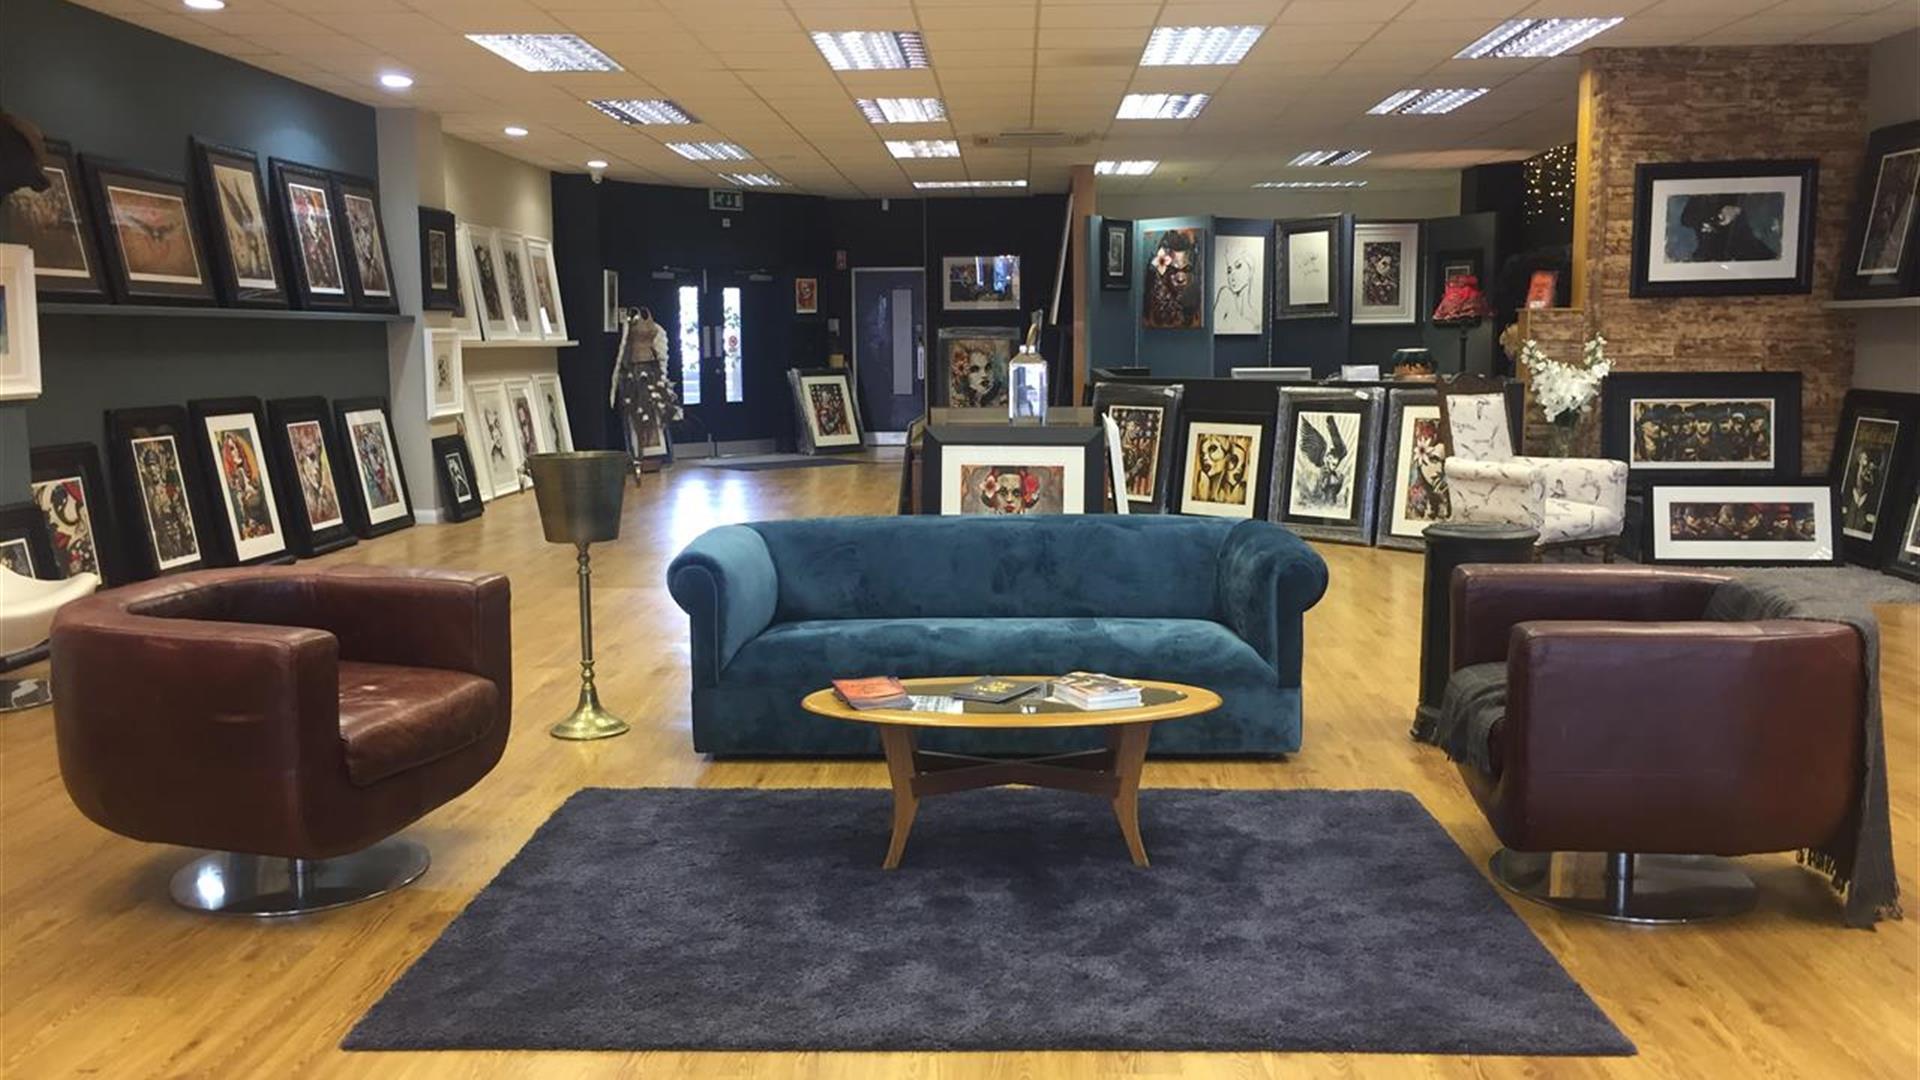 Photo of the inside of the gallery showing seating area and paintings on display for sale